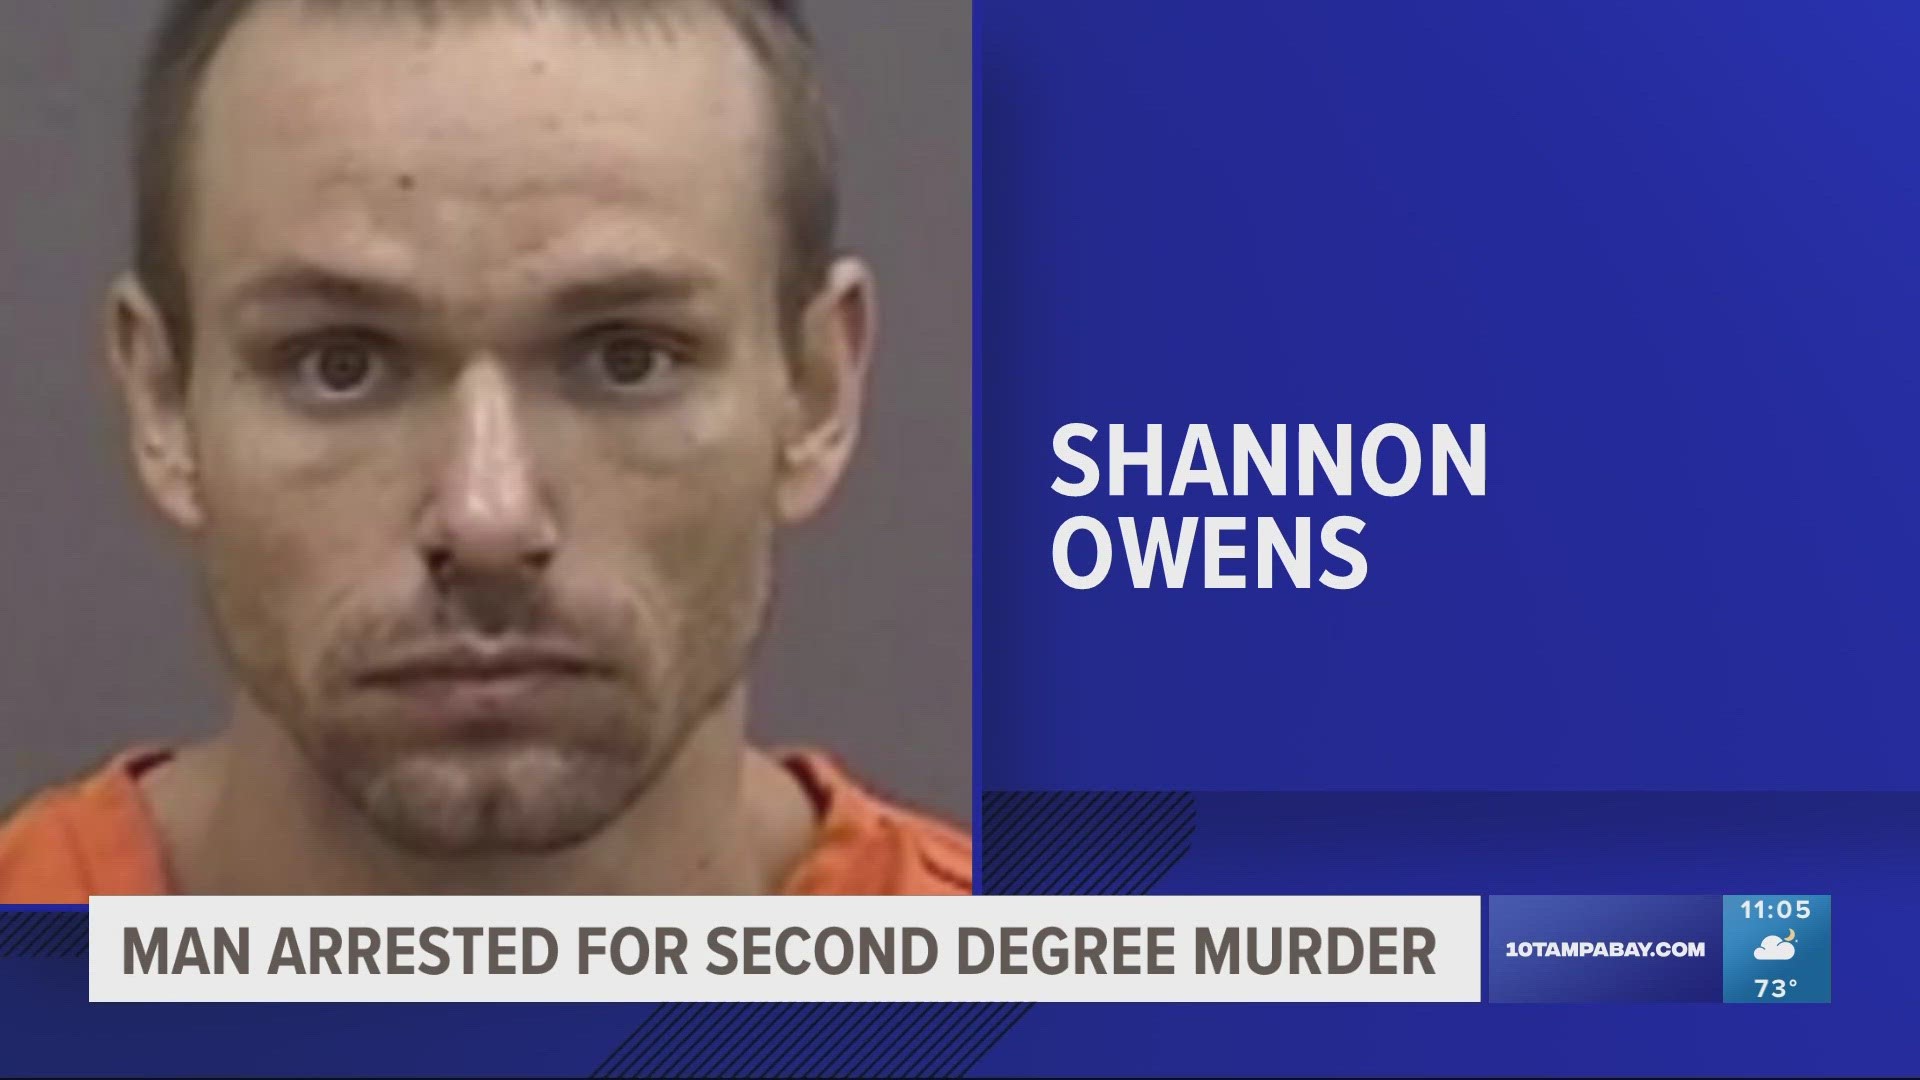 Shannon Owens, 31, is accused of shooting a man around 11:20 p.m. in the 5500 block of Deeson Road in Lakeland.